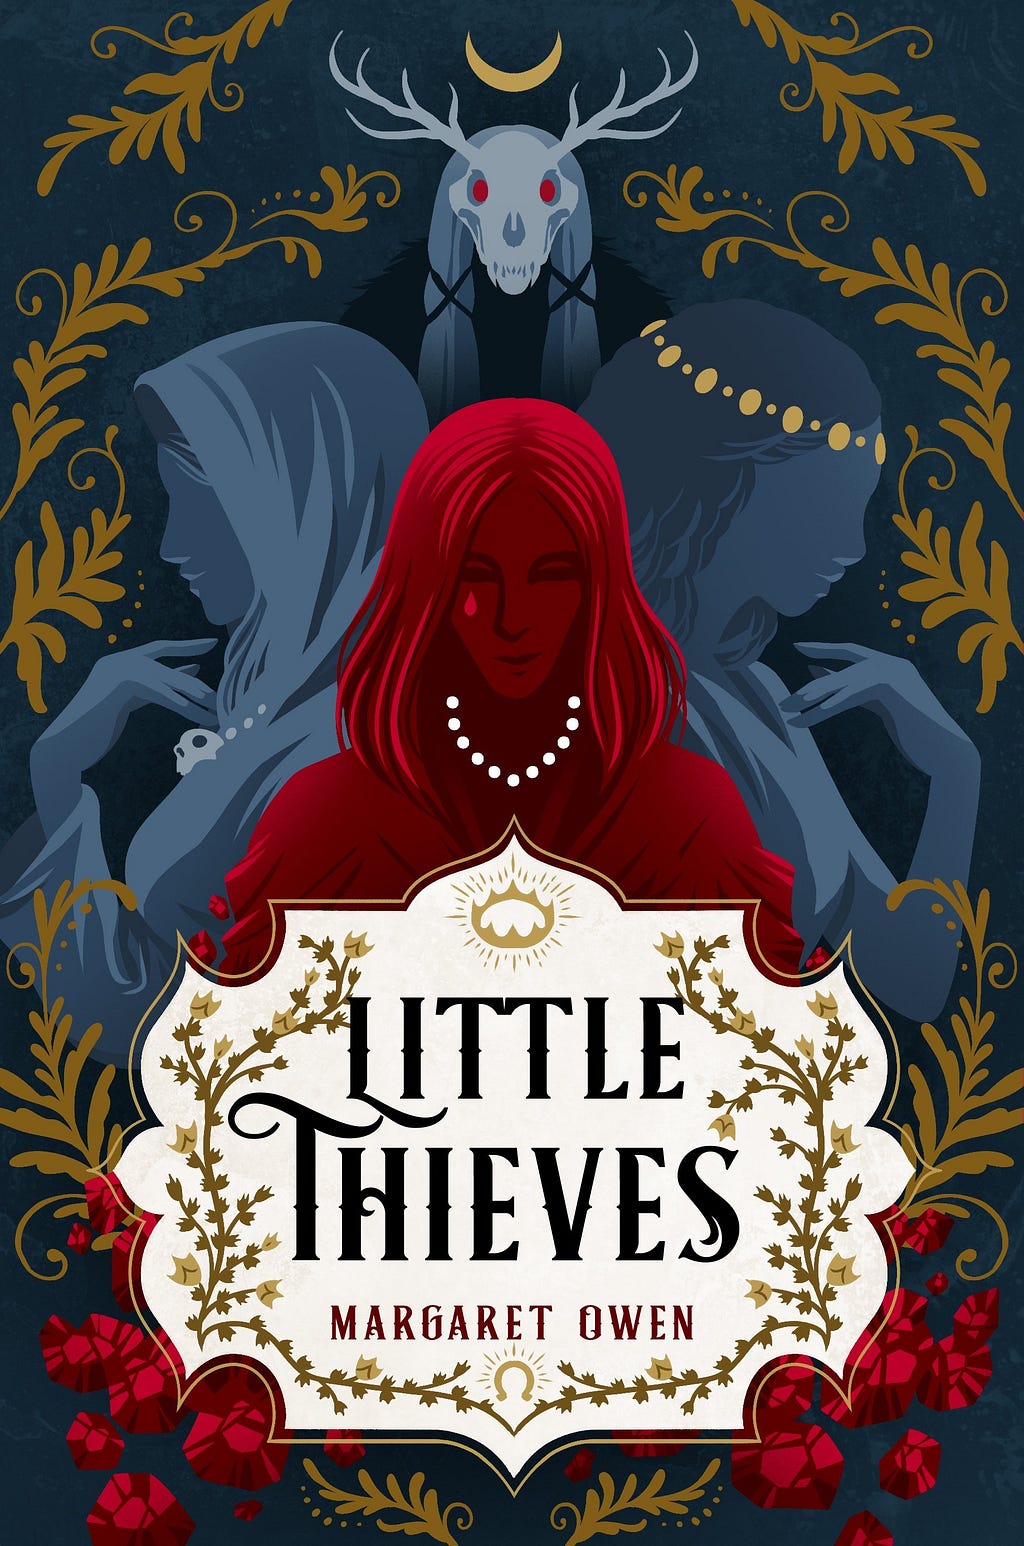 The cover of little thieves by Margaret Owen. The cover shows three female figures against a dark blue background, with a fourth antlered figure standing over them. The central figure is drawn in shades of red, with the book title and author name on a white plaque in front of her.